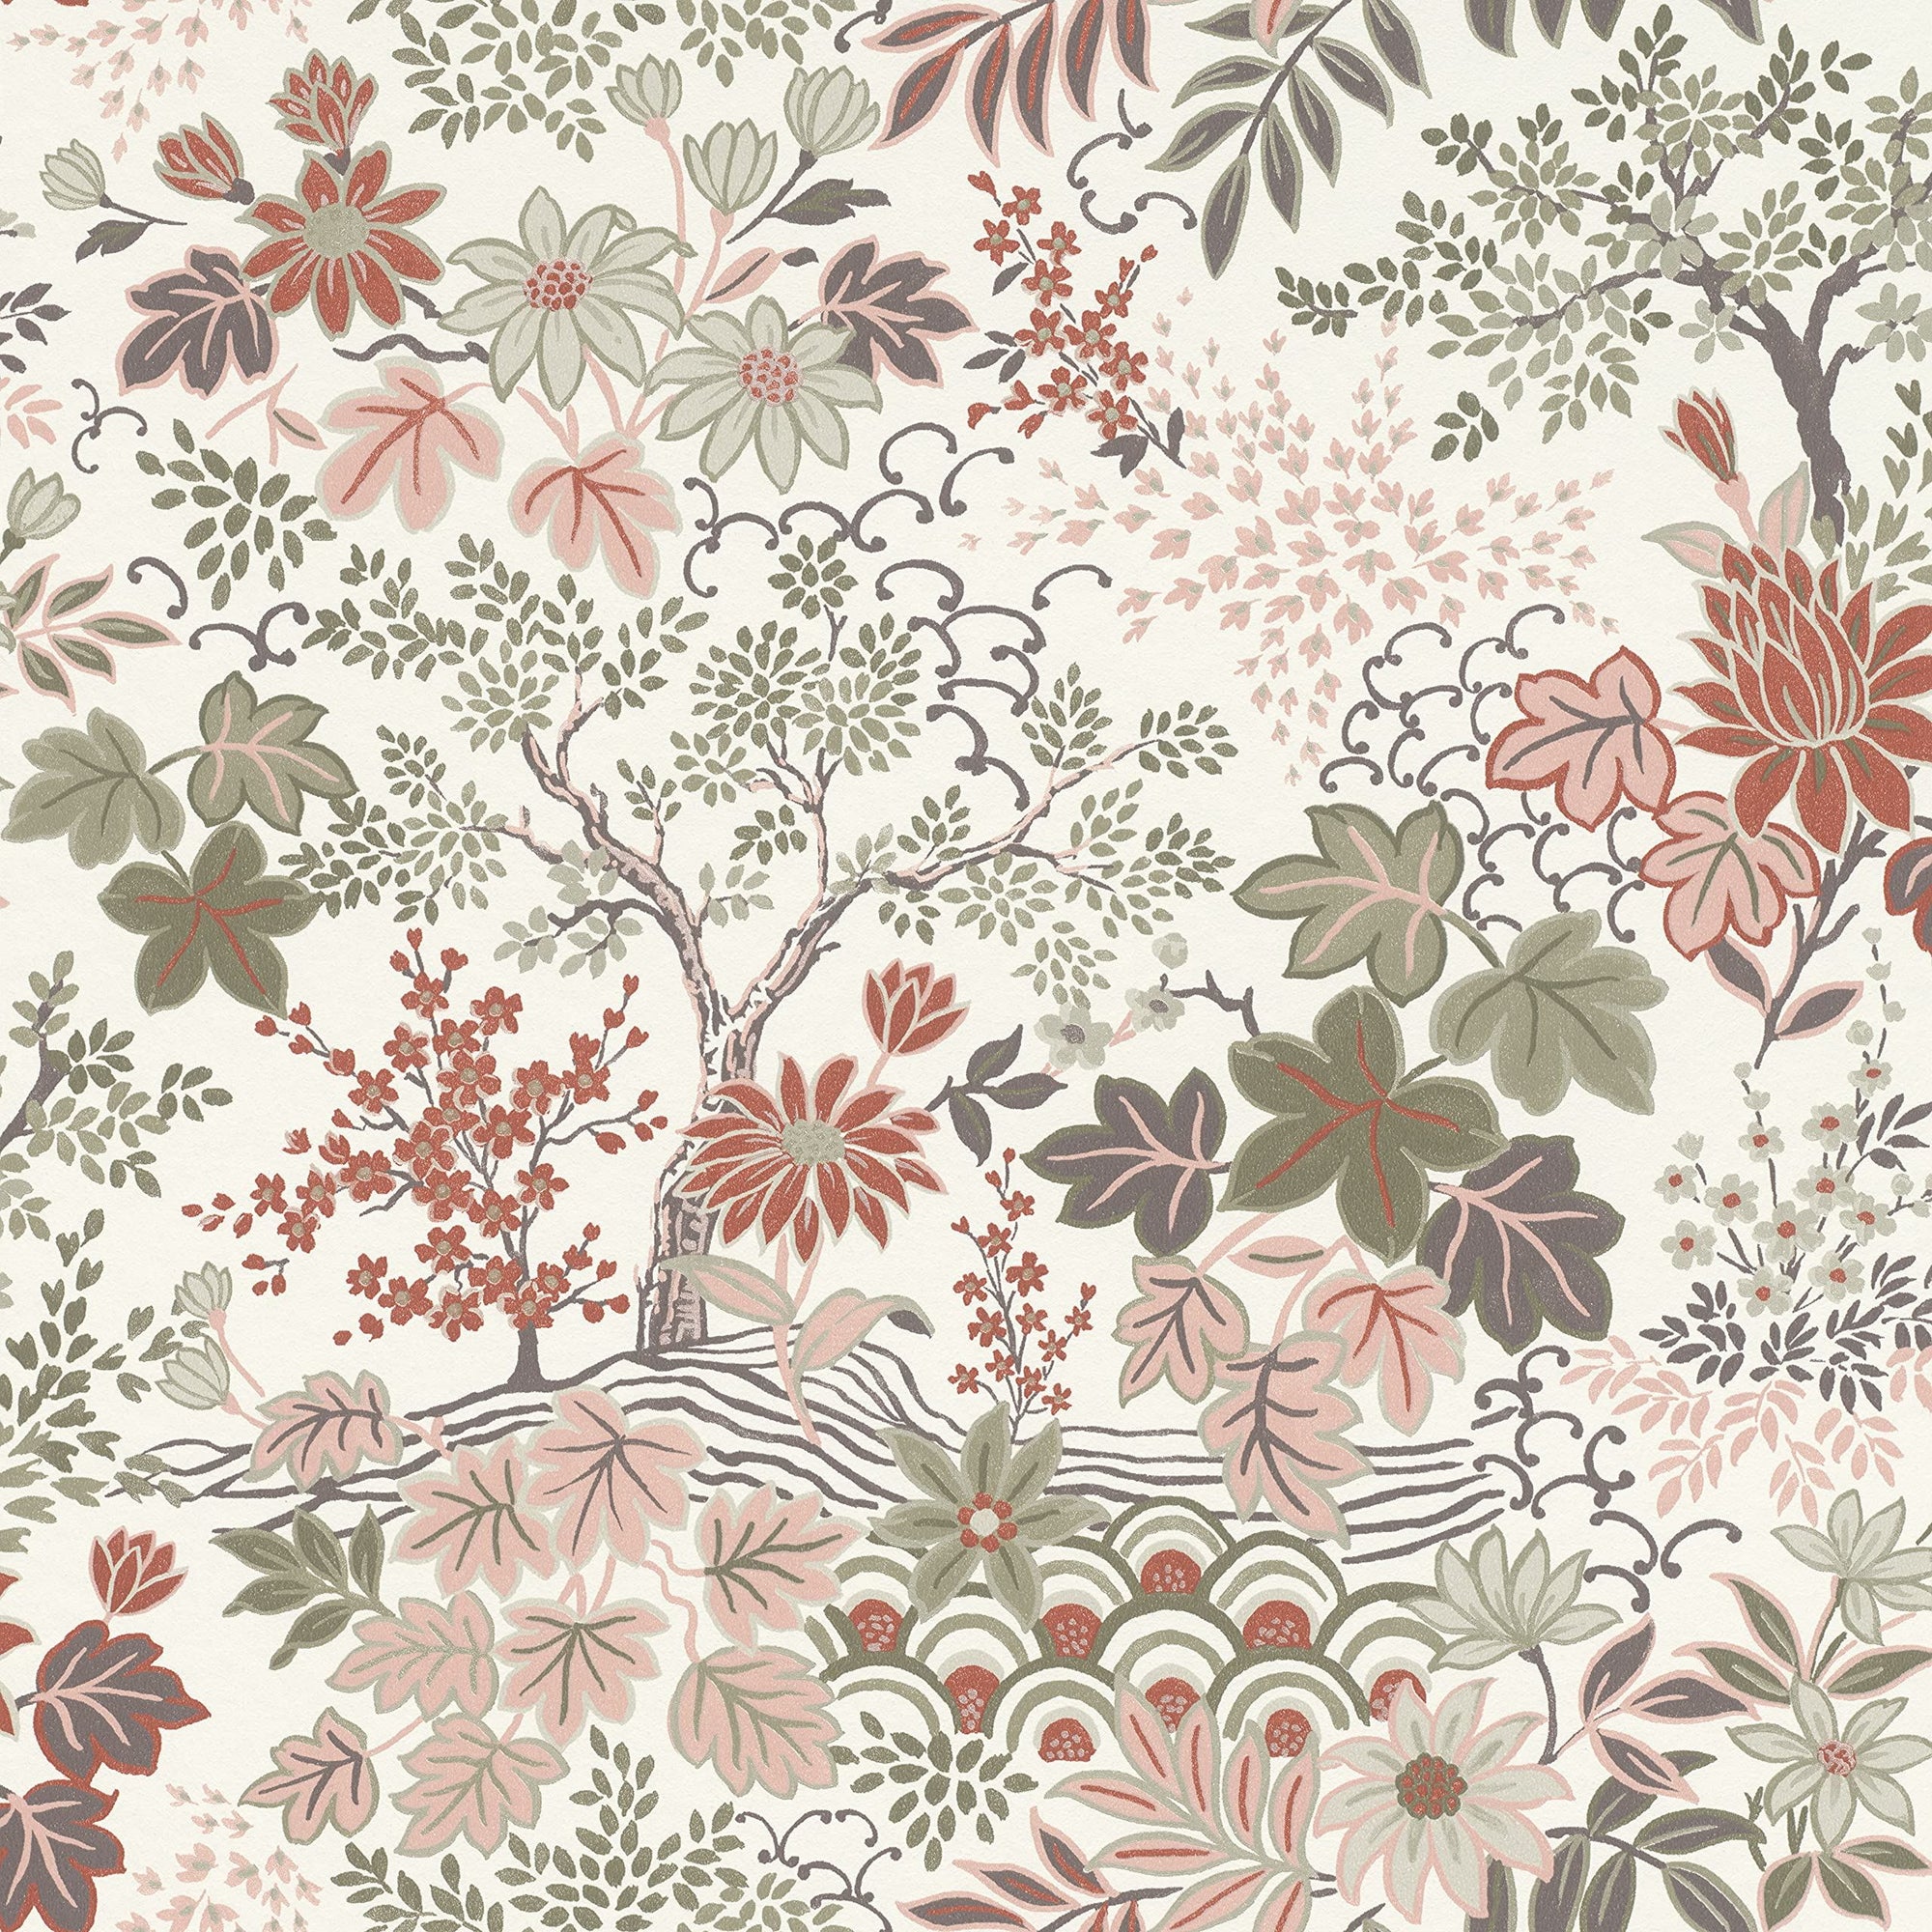 Rasch Wallpaper 553338 - Colourful Non-Woven Wallpaper from The Salisbury Collection with Different Coloured Leaves on White Background with Slight Structure - 10.05 m x 53 cm (L x W)